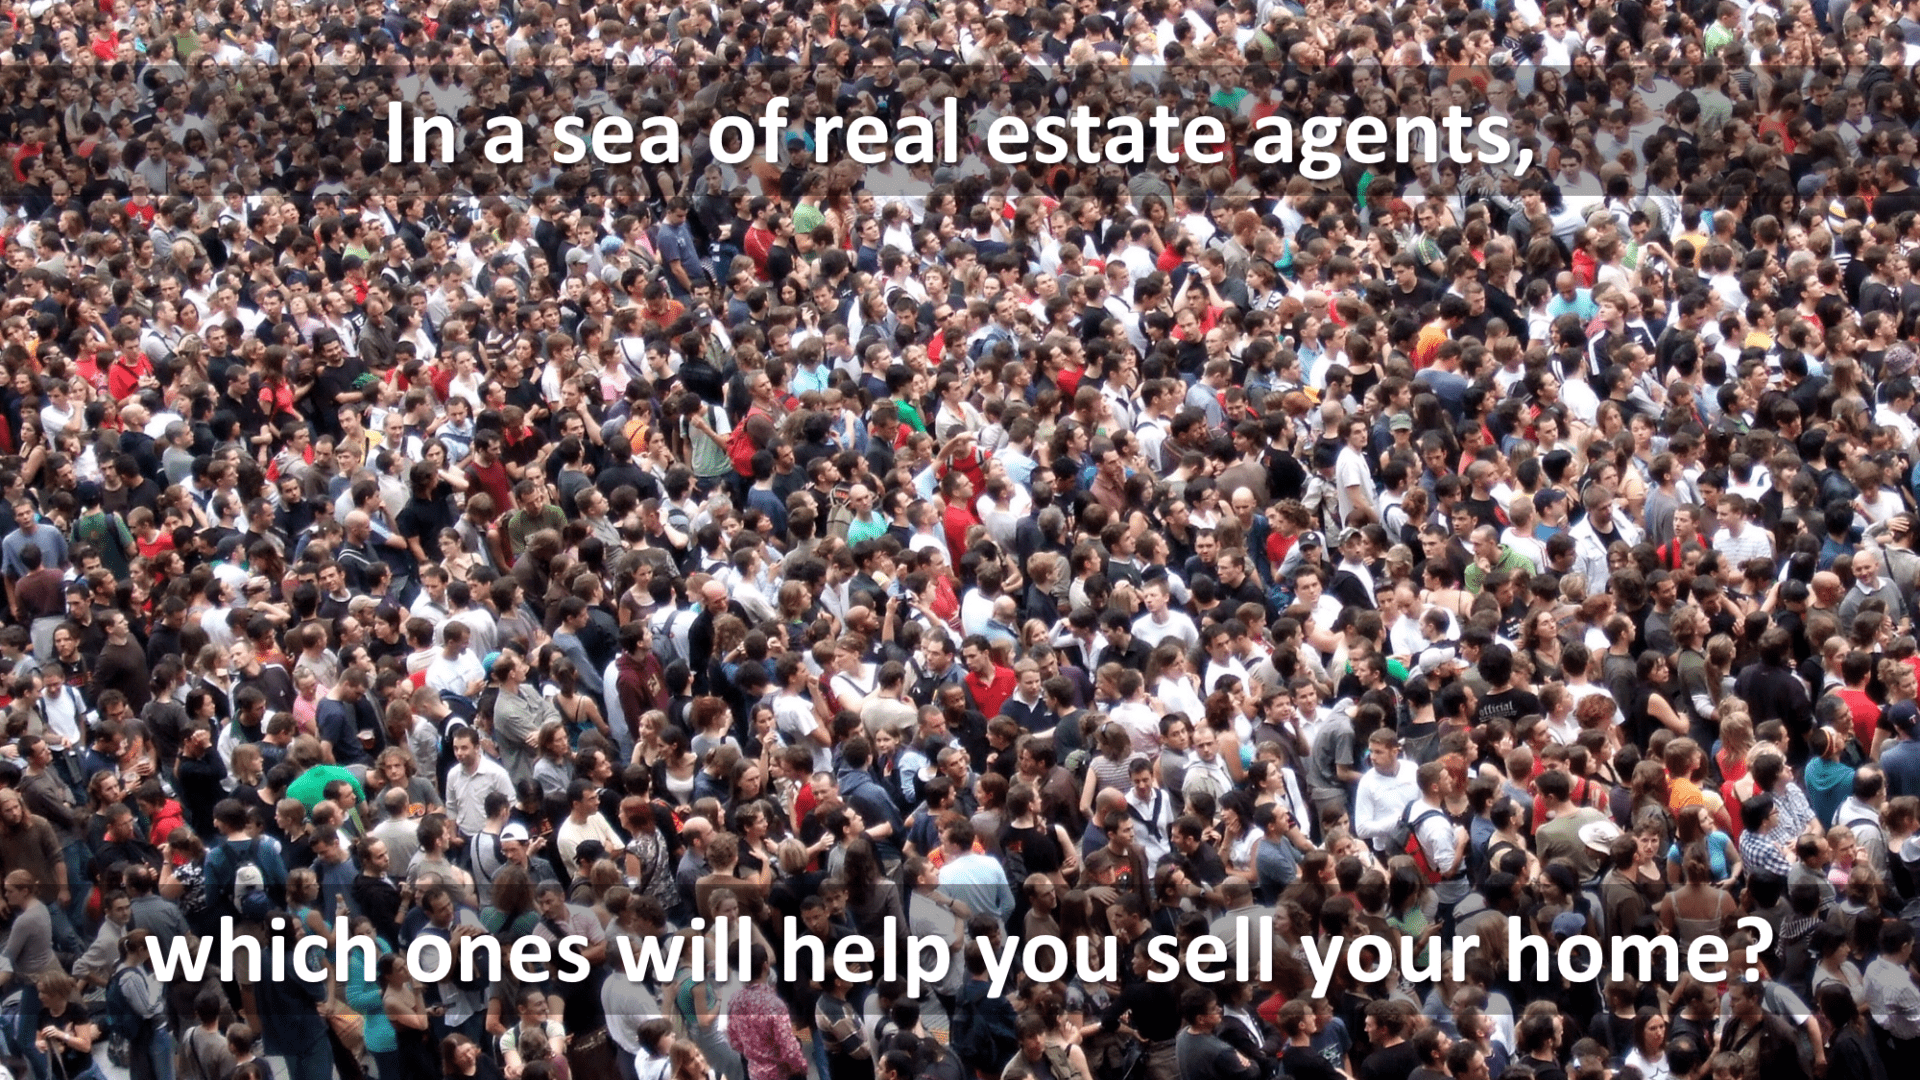 In a sea of real estate agents, which ones will help you sell your home?